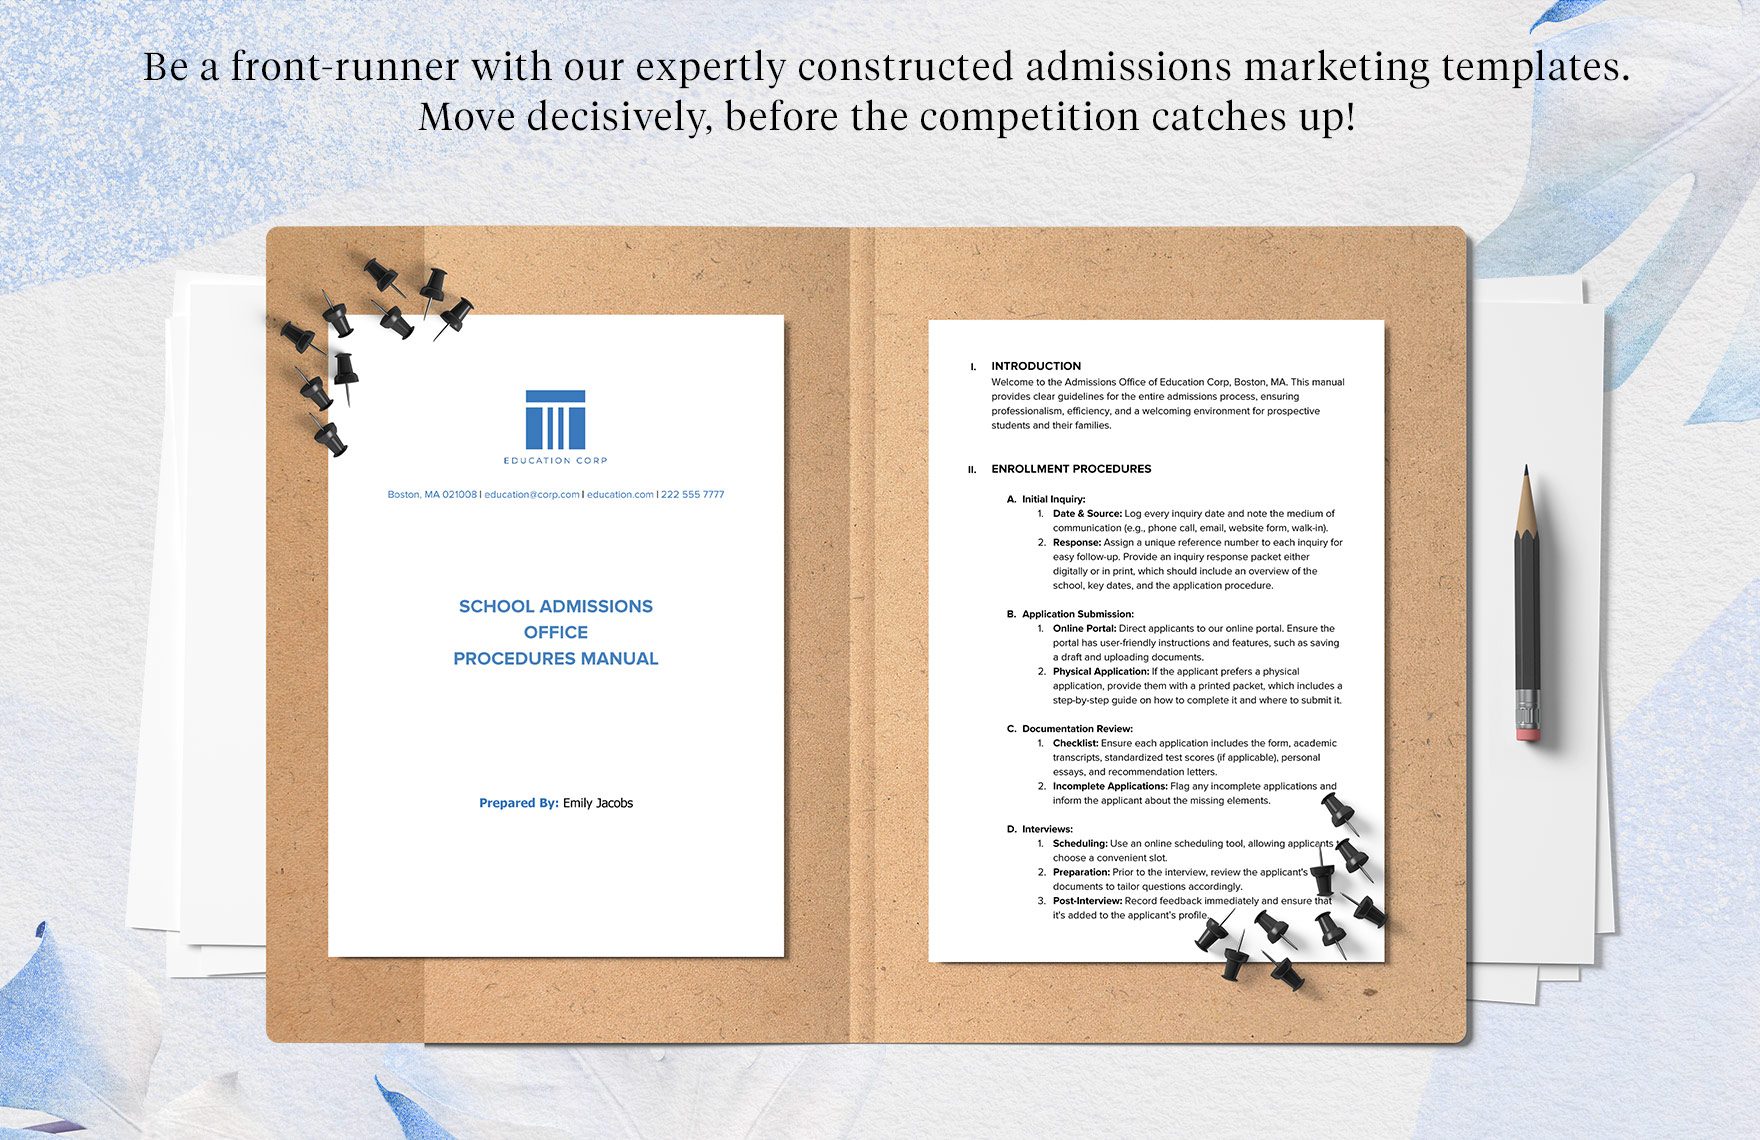 School Admissions Office Procedures Manual Template